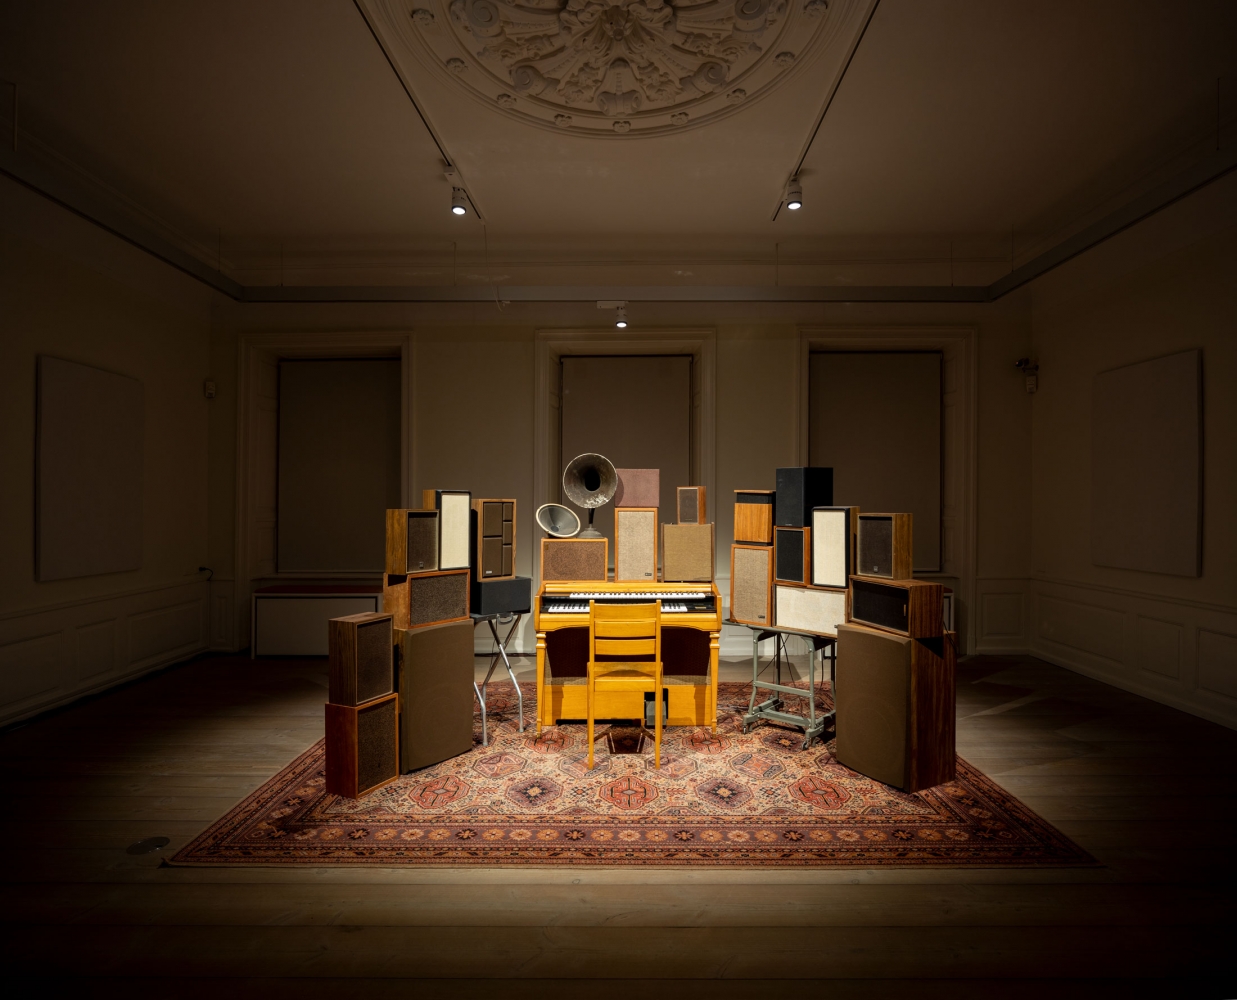 Janet Cardiff and George Bures Miller
The Poetry Machine,&amp;nbsp;2017
Interactive audio/mixed-media installation including organ, speakers, carpet, computer and electronics
Dimensions variable
Installation view,&amp;nbsp;Leonard Cohen: A Crack in Everything
October 24, 2019 &amp;ndash; August 2, 2020
Kunstforeningen GL STRAND, Copenhagen, Denmark
Photo:&amp;nbsp;Jan Sõndergaard